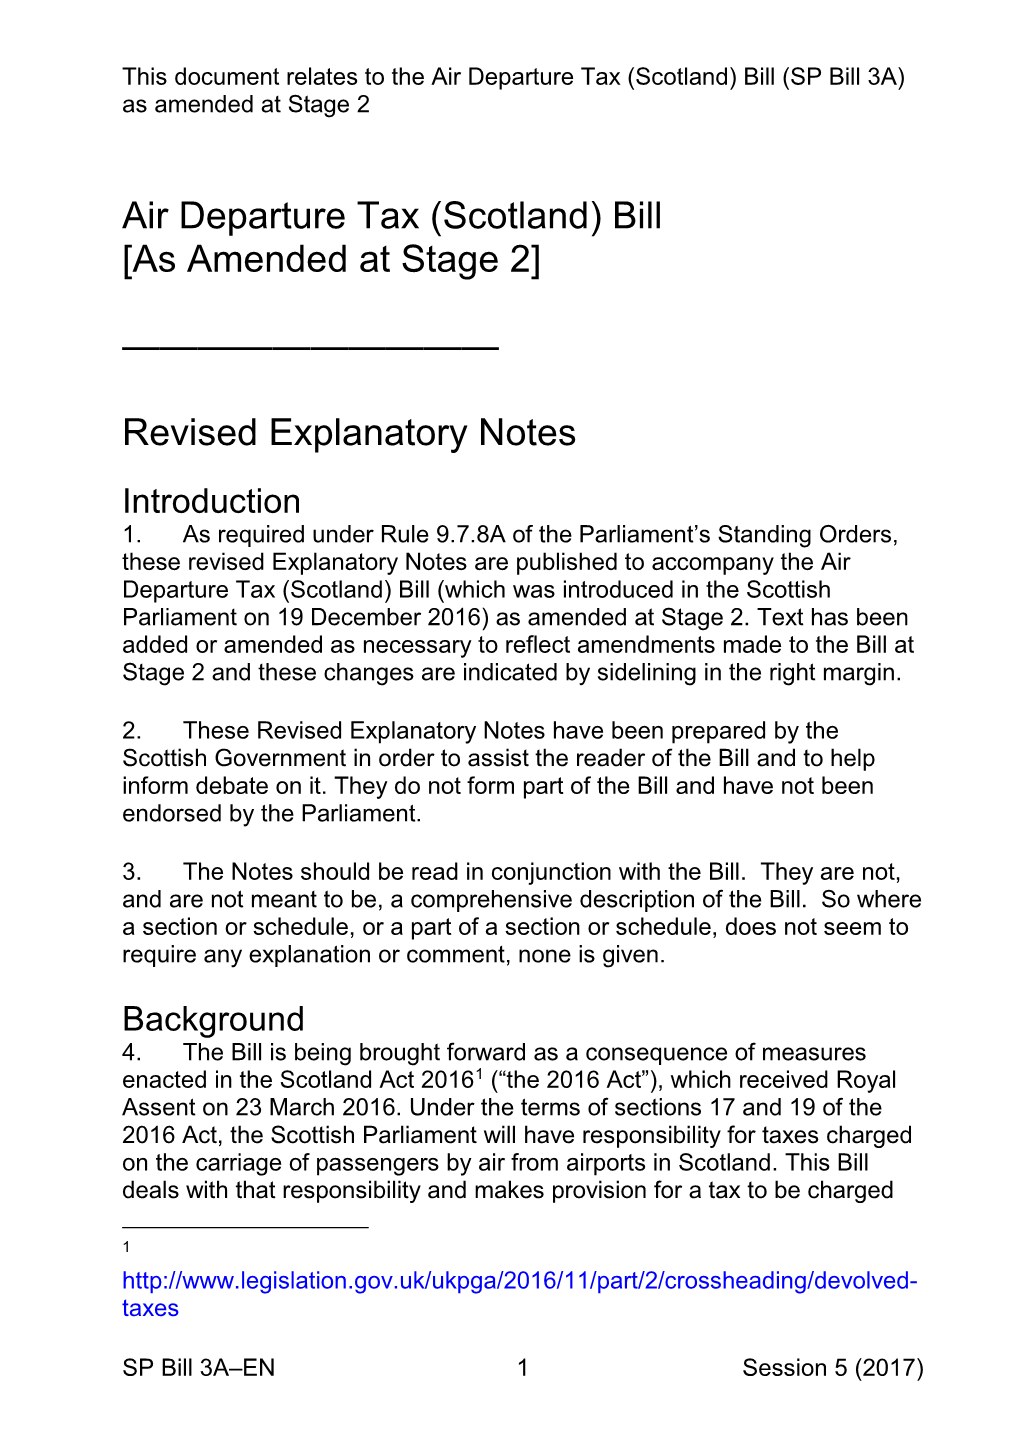 Air Departure Tax (Scotland) Bill (SP Bill 3A) As Amended at Stage 2